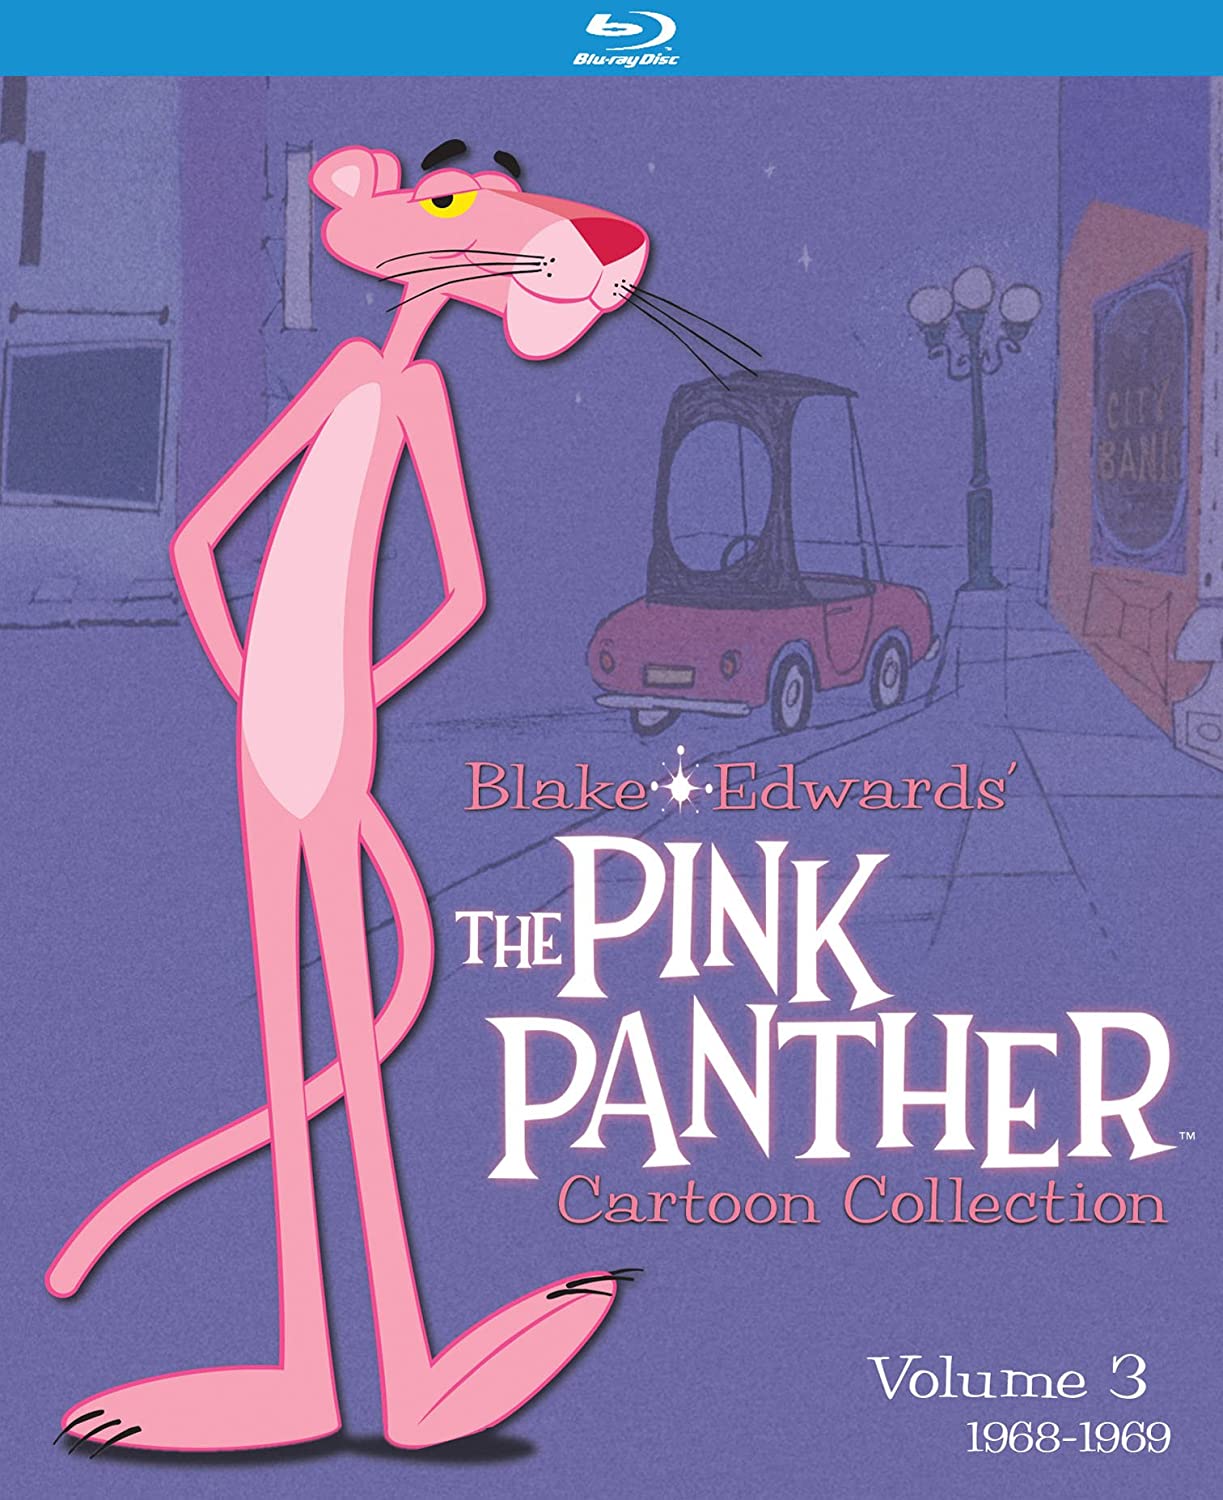 The Pink Panther Cartoon Collection: Volume 3, The Pink Panther Wiki